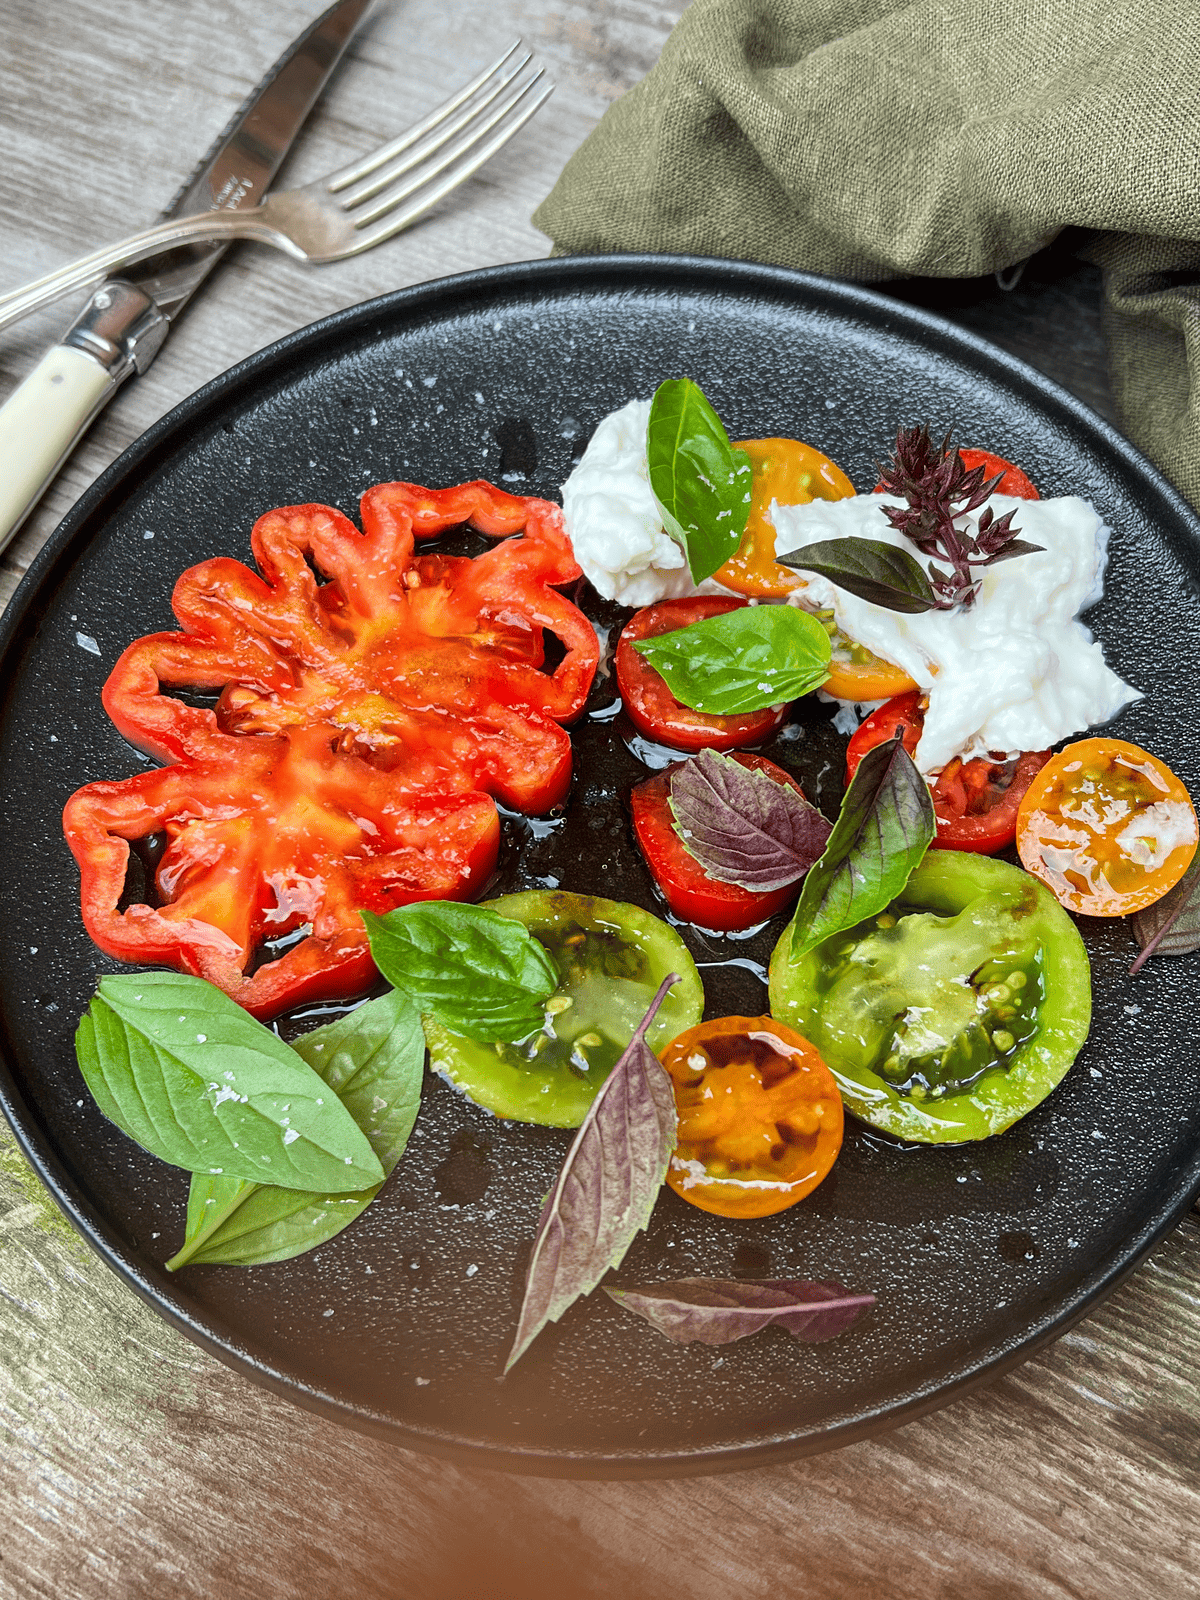 Tomato salad with scalloped tomato, green zebra, Sungold and Juliet tomatoes.